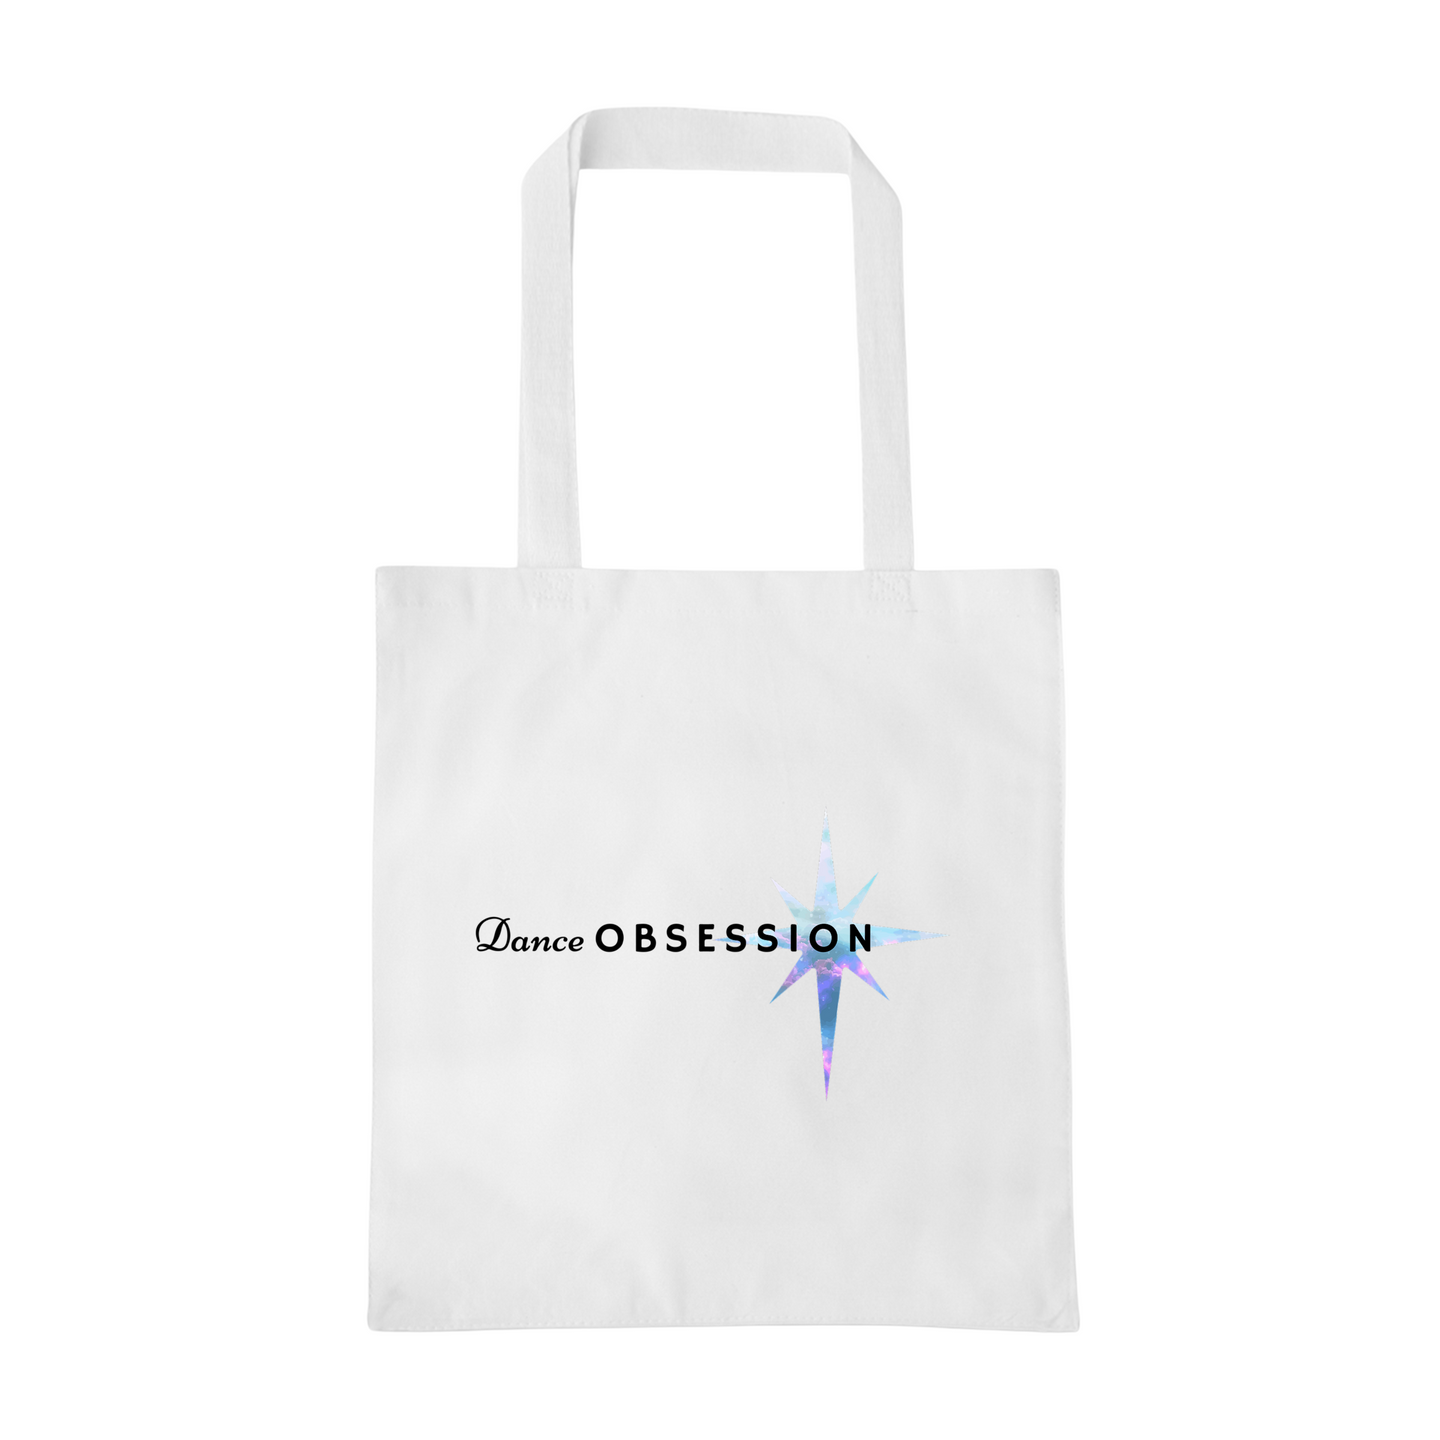 Dance Obsession Tote Bag